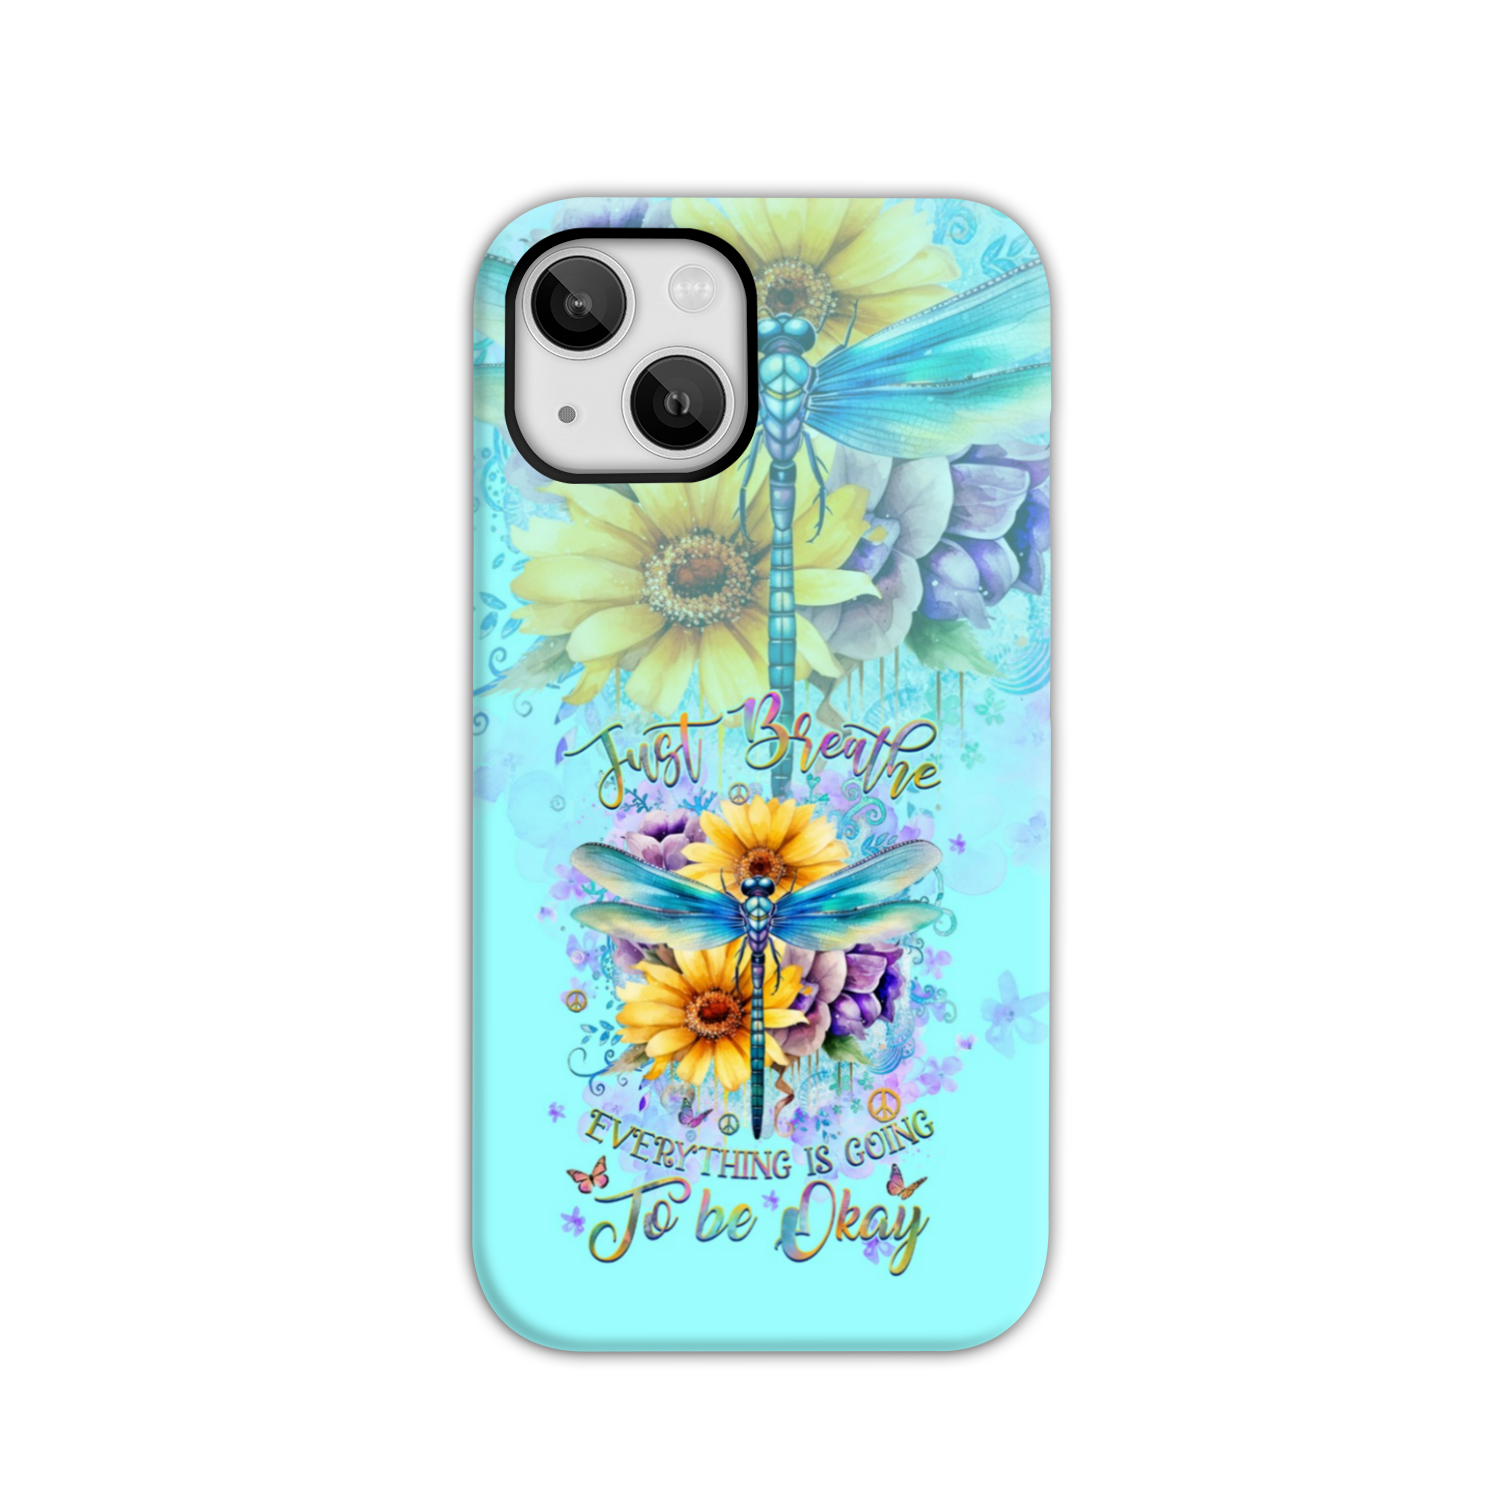 JUST BREATHE DRAGONFLY PHONE CASE - YH0210233